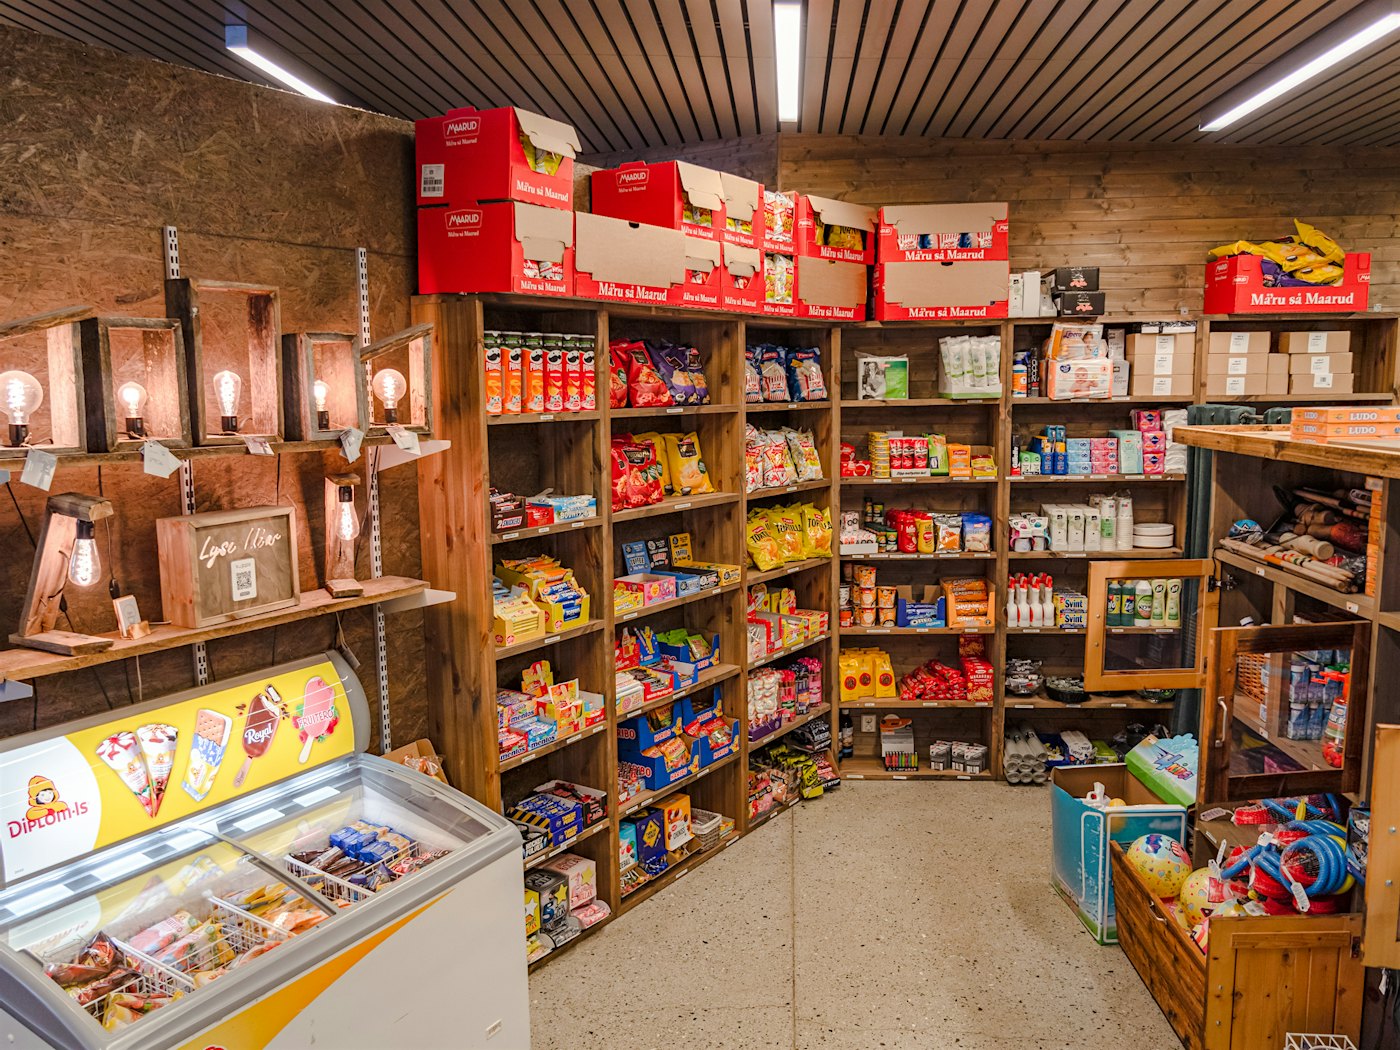 Overview of the shop at Topcamp Hallingdal, with shop shelves filled with ice cream, sweets, snacks, food and hygiene products. Photo